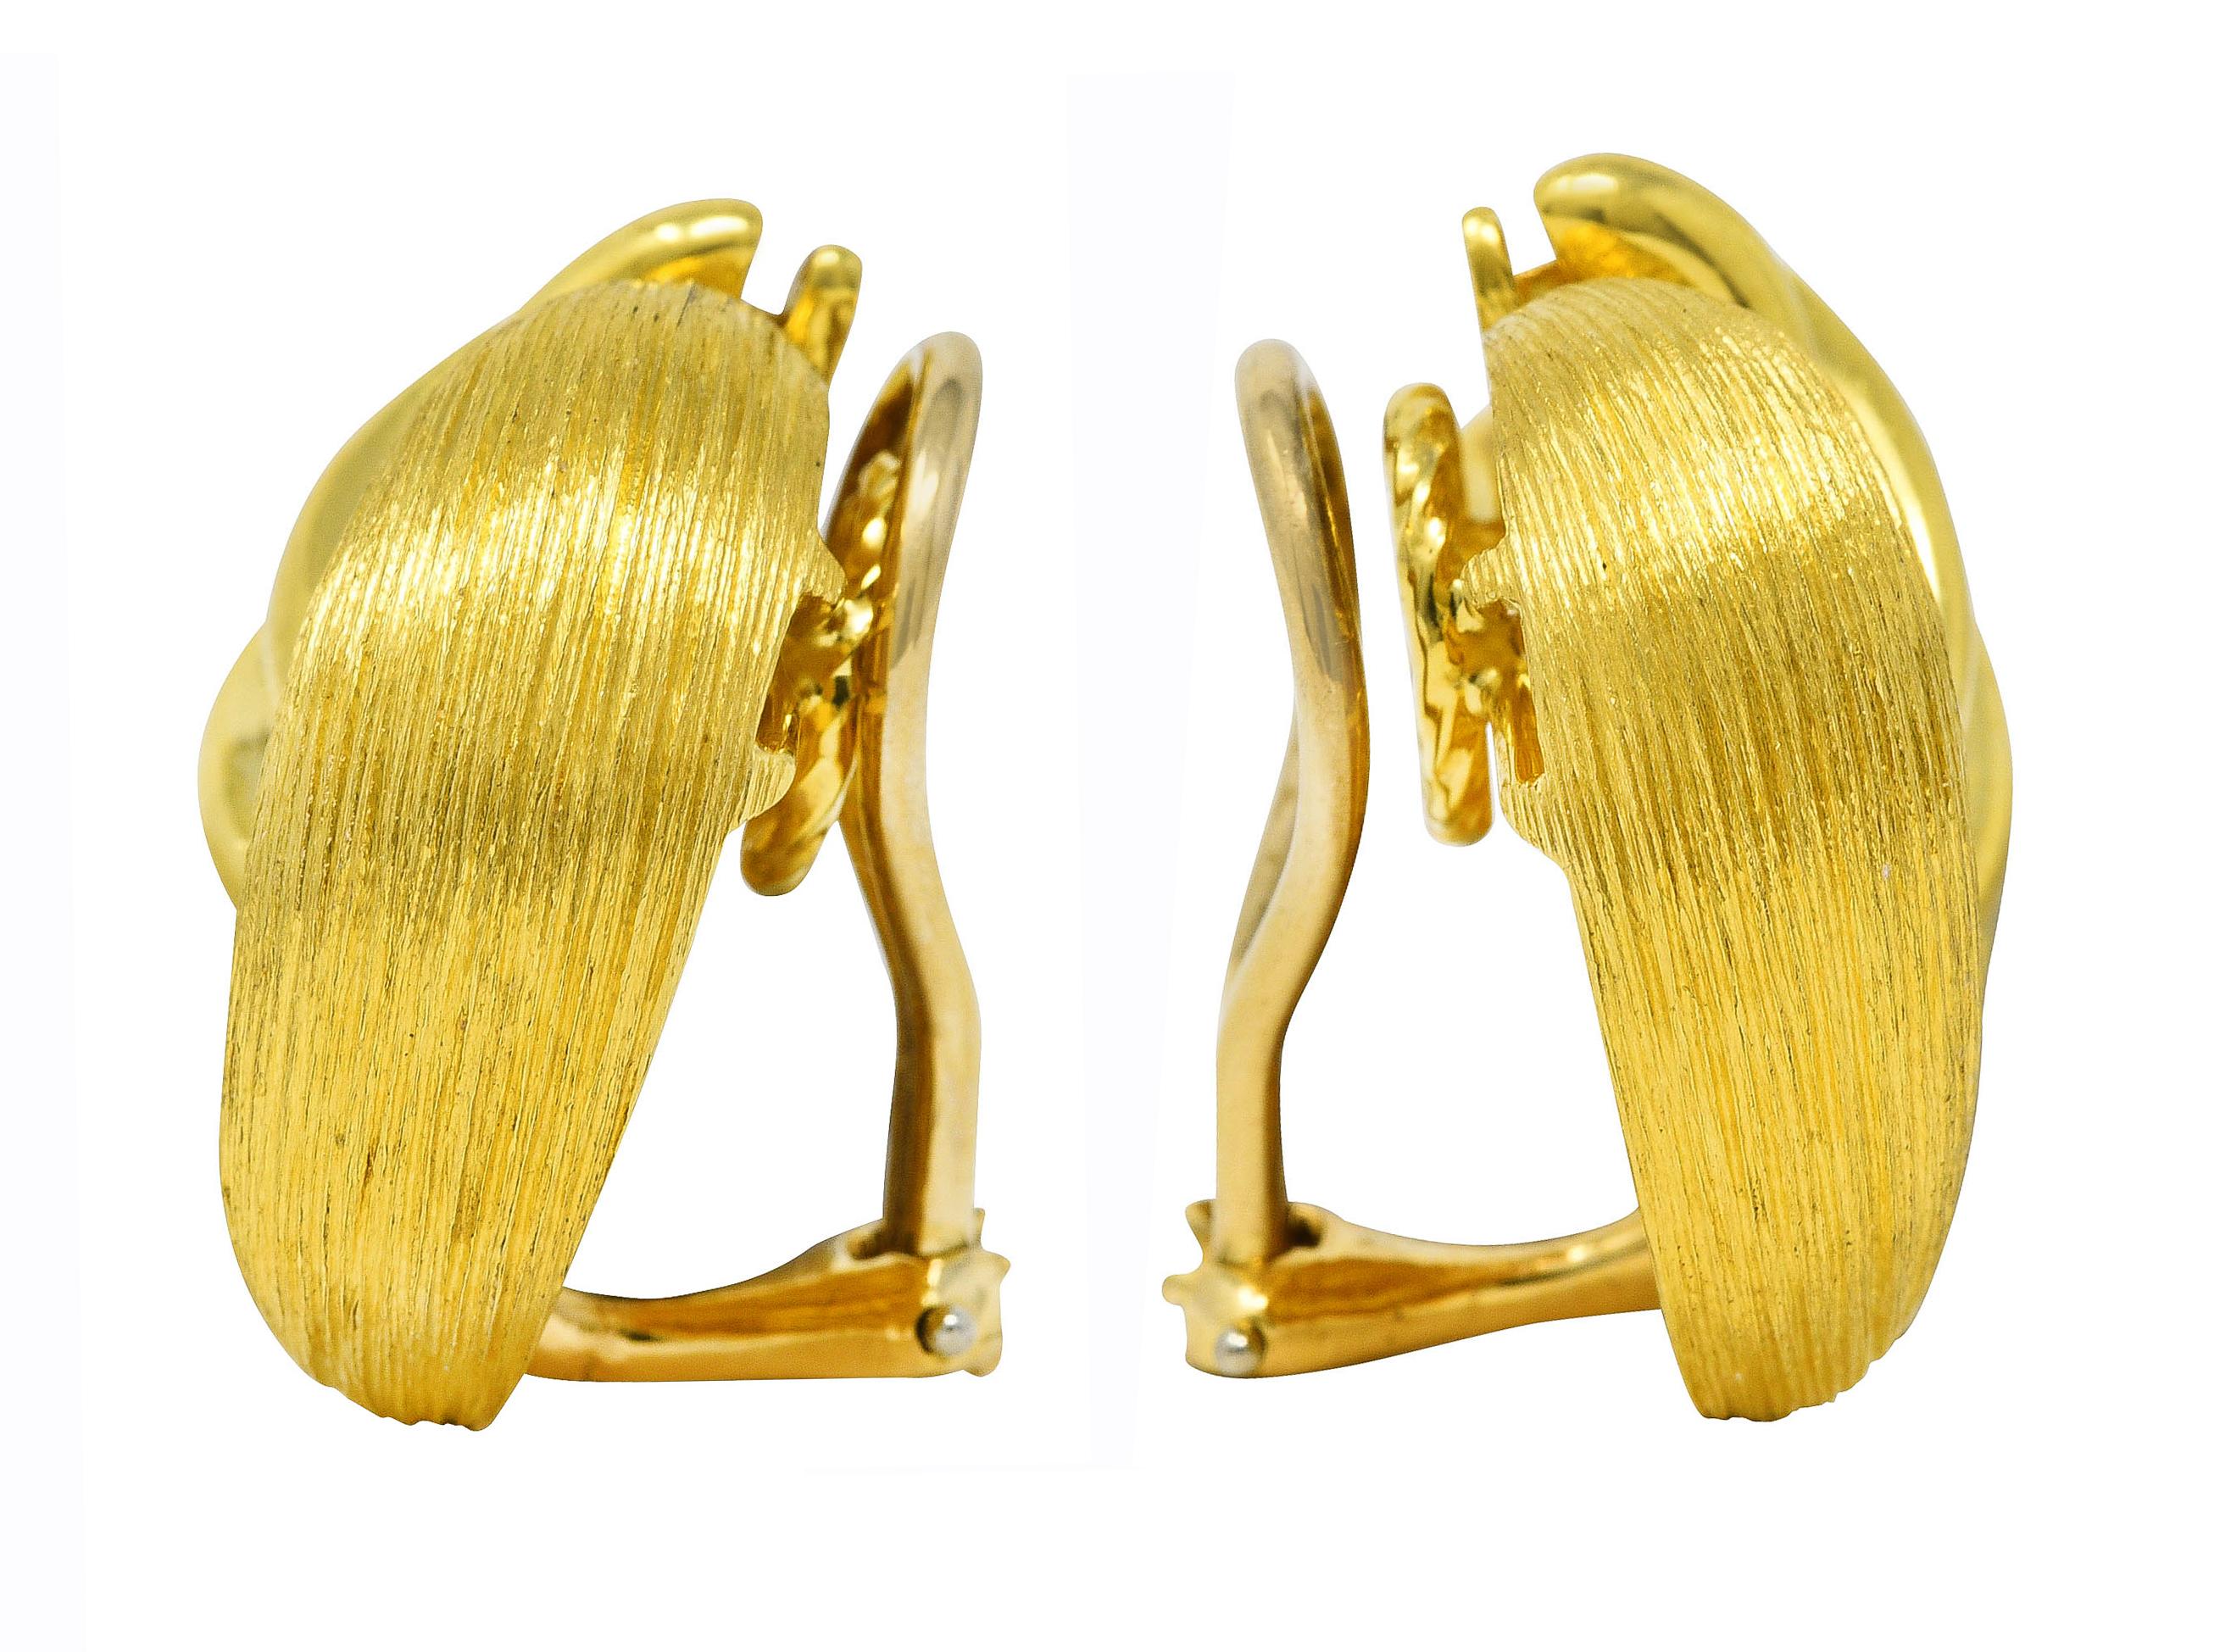 Ear-clip earrings are designed as two contrasting gold forms swirling together

One from is high polished and deeply grooved while the other is brushed gold

Completed by hinged omega backs

Stamped 18k and 750 for 18 karat gold

Numbered and signed